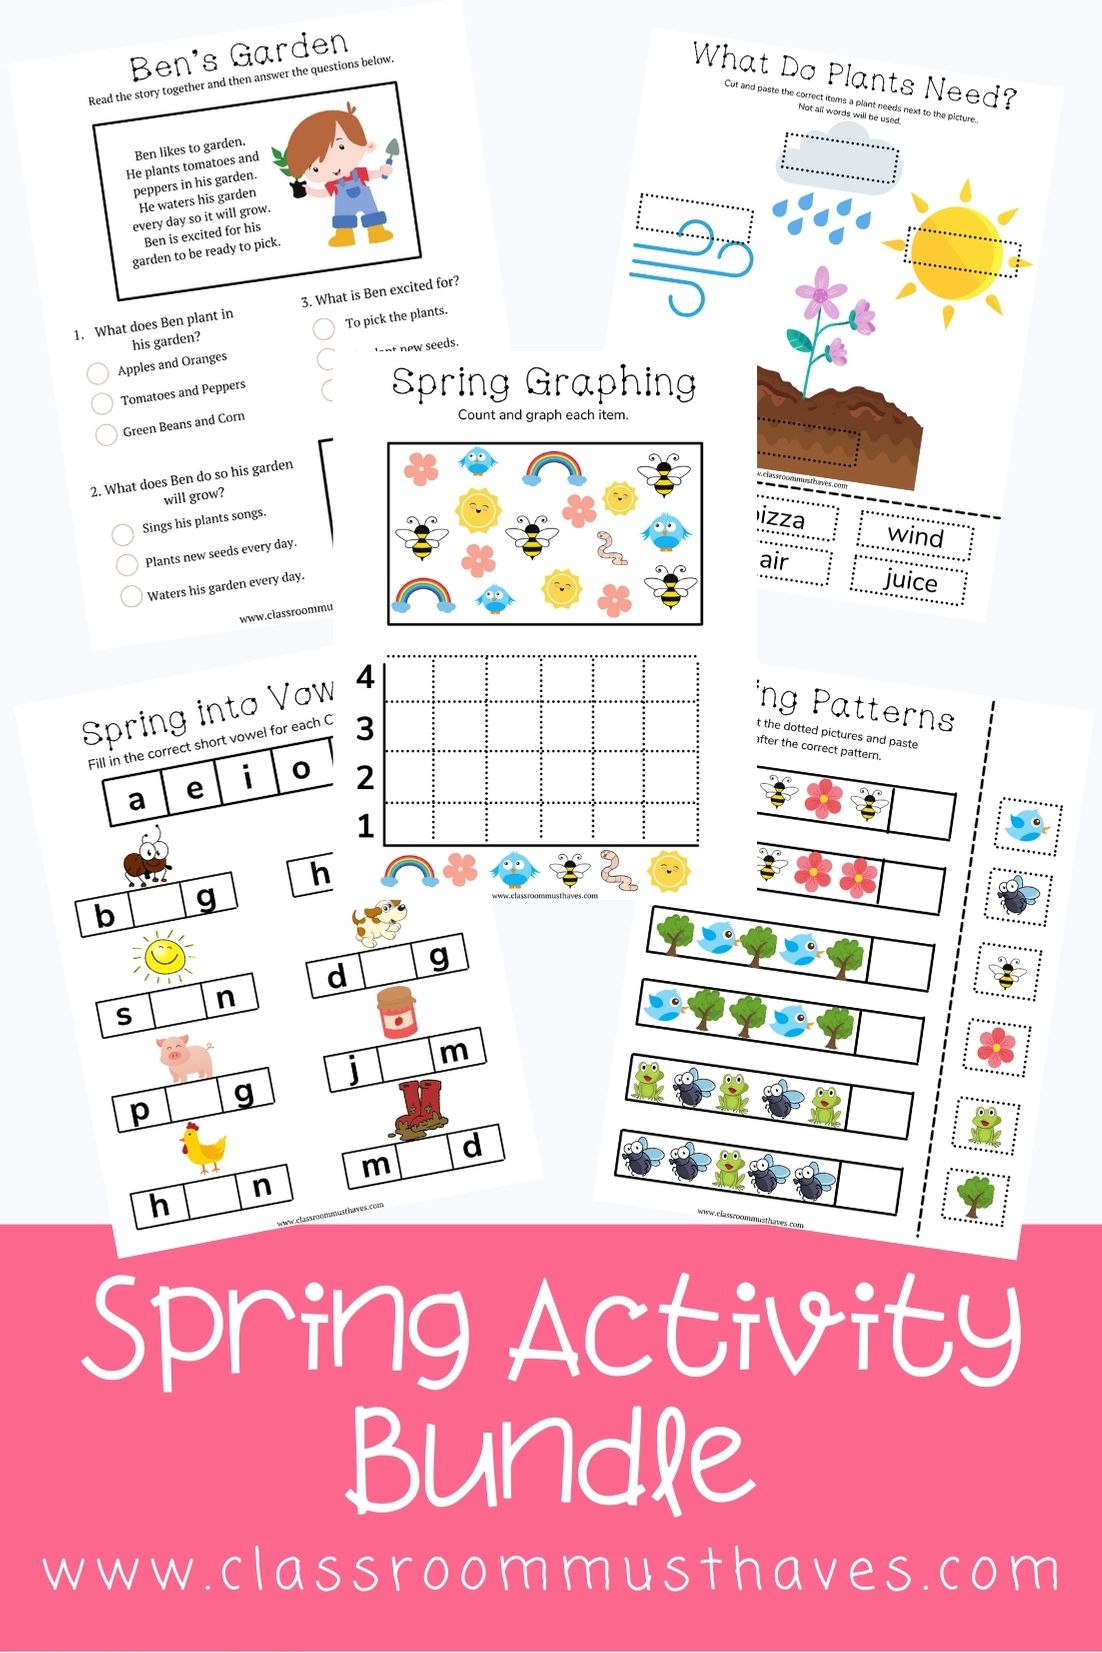 The Spring Worksheet Bundle includes 5 activities for your preschool or kindergarten classroom. Cut & Paste, Graphing, Patterns & More! Spring themed! via @classroommusthaves